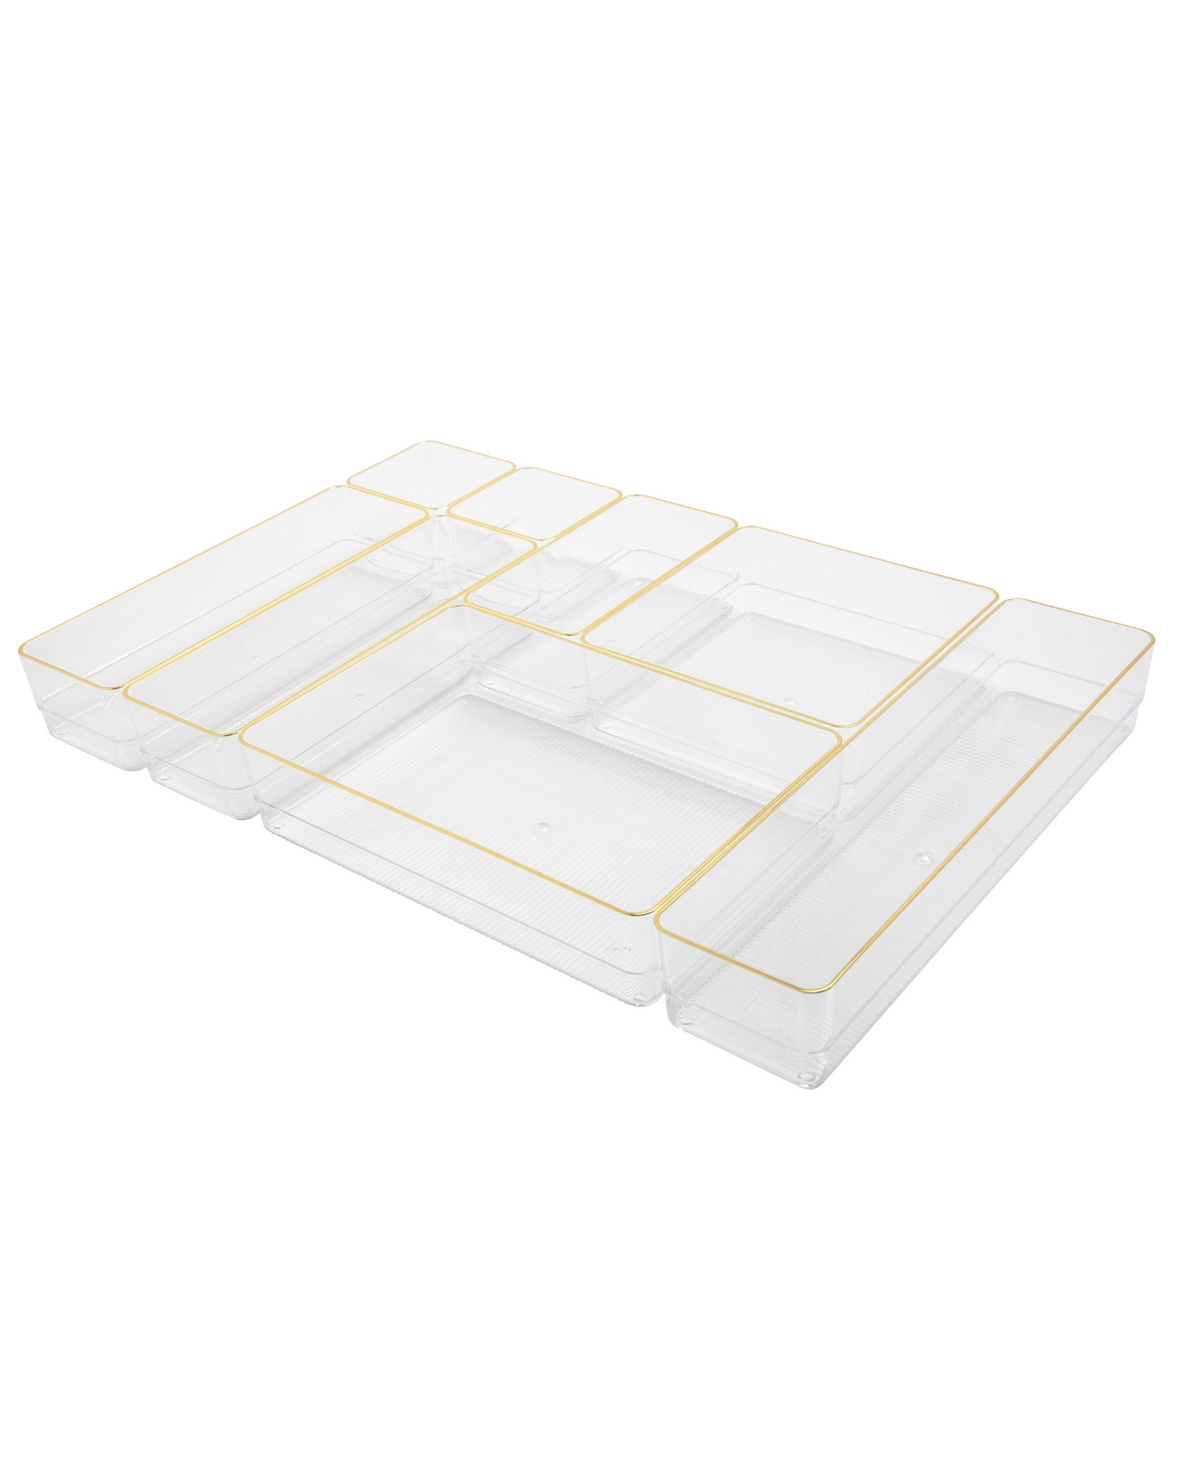 Kerry Plastic Stackable Office Desk Drawer Organizers, Various Sizes, 8 Compartments - Clear, Gold Trim